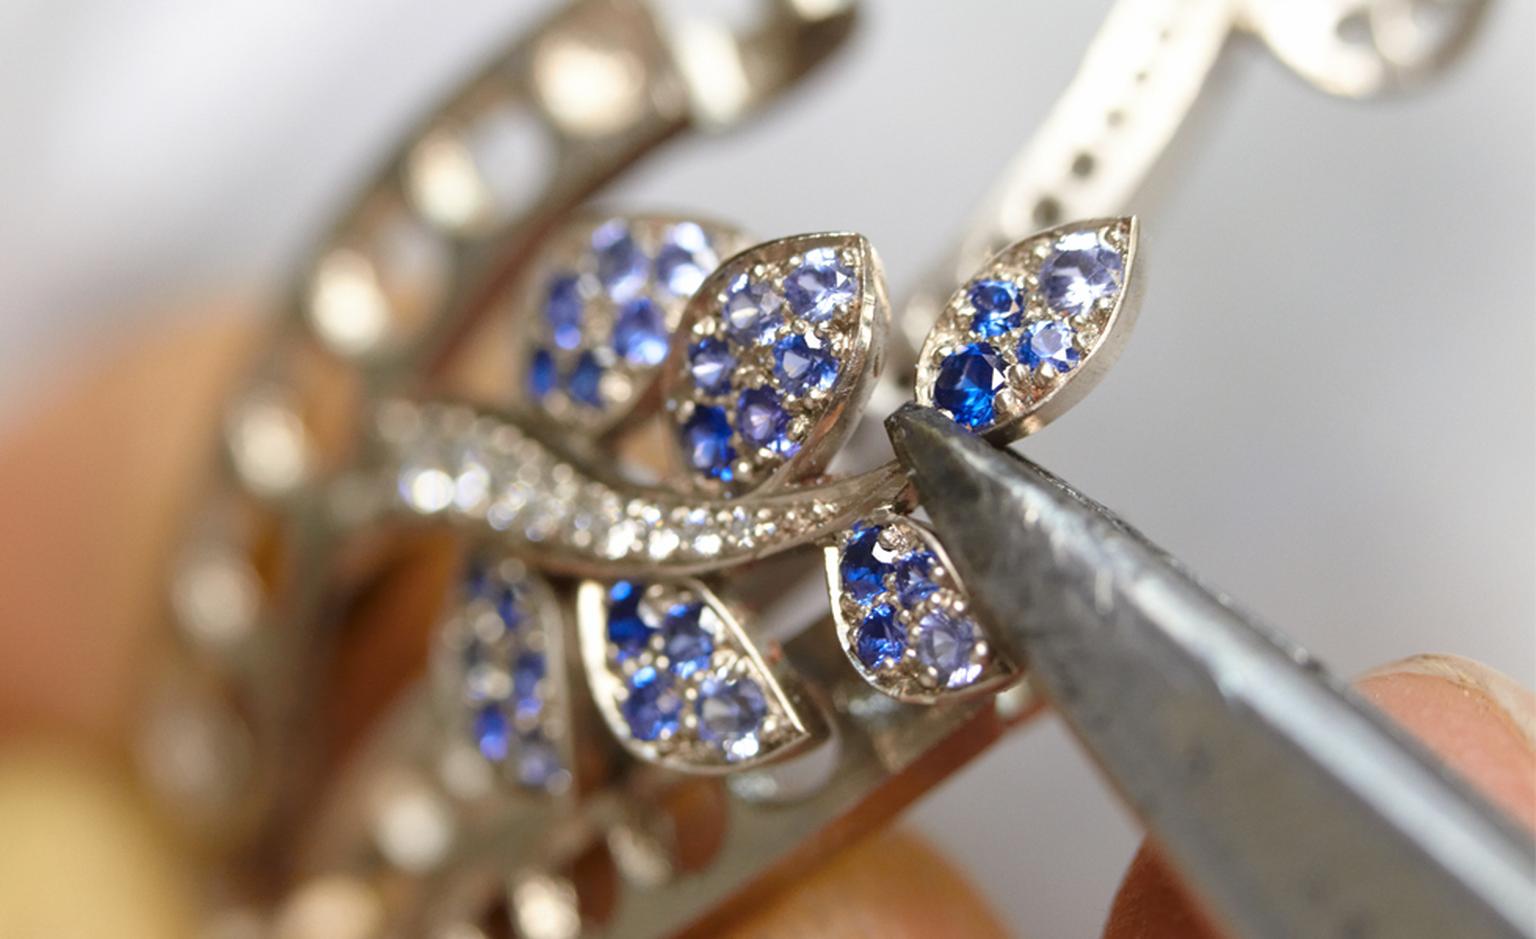 Setting sapphires into a gold branch at Van Cleef & Arpels' atelier